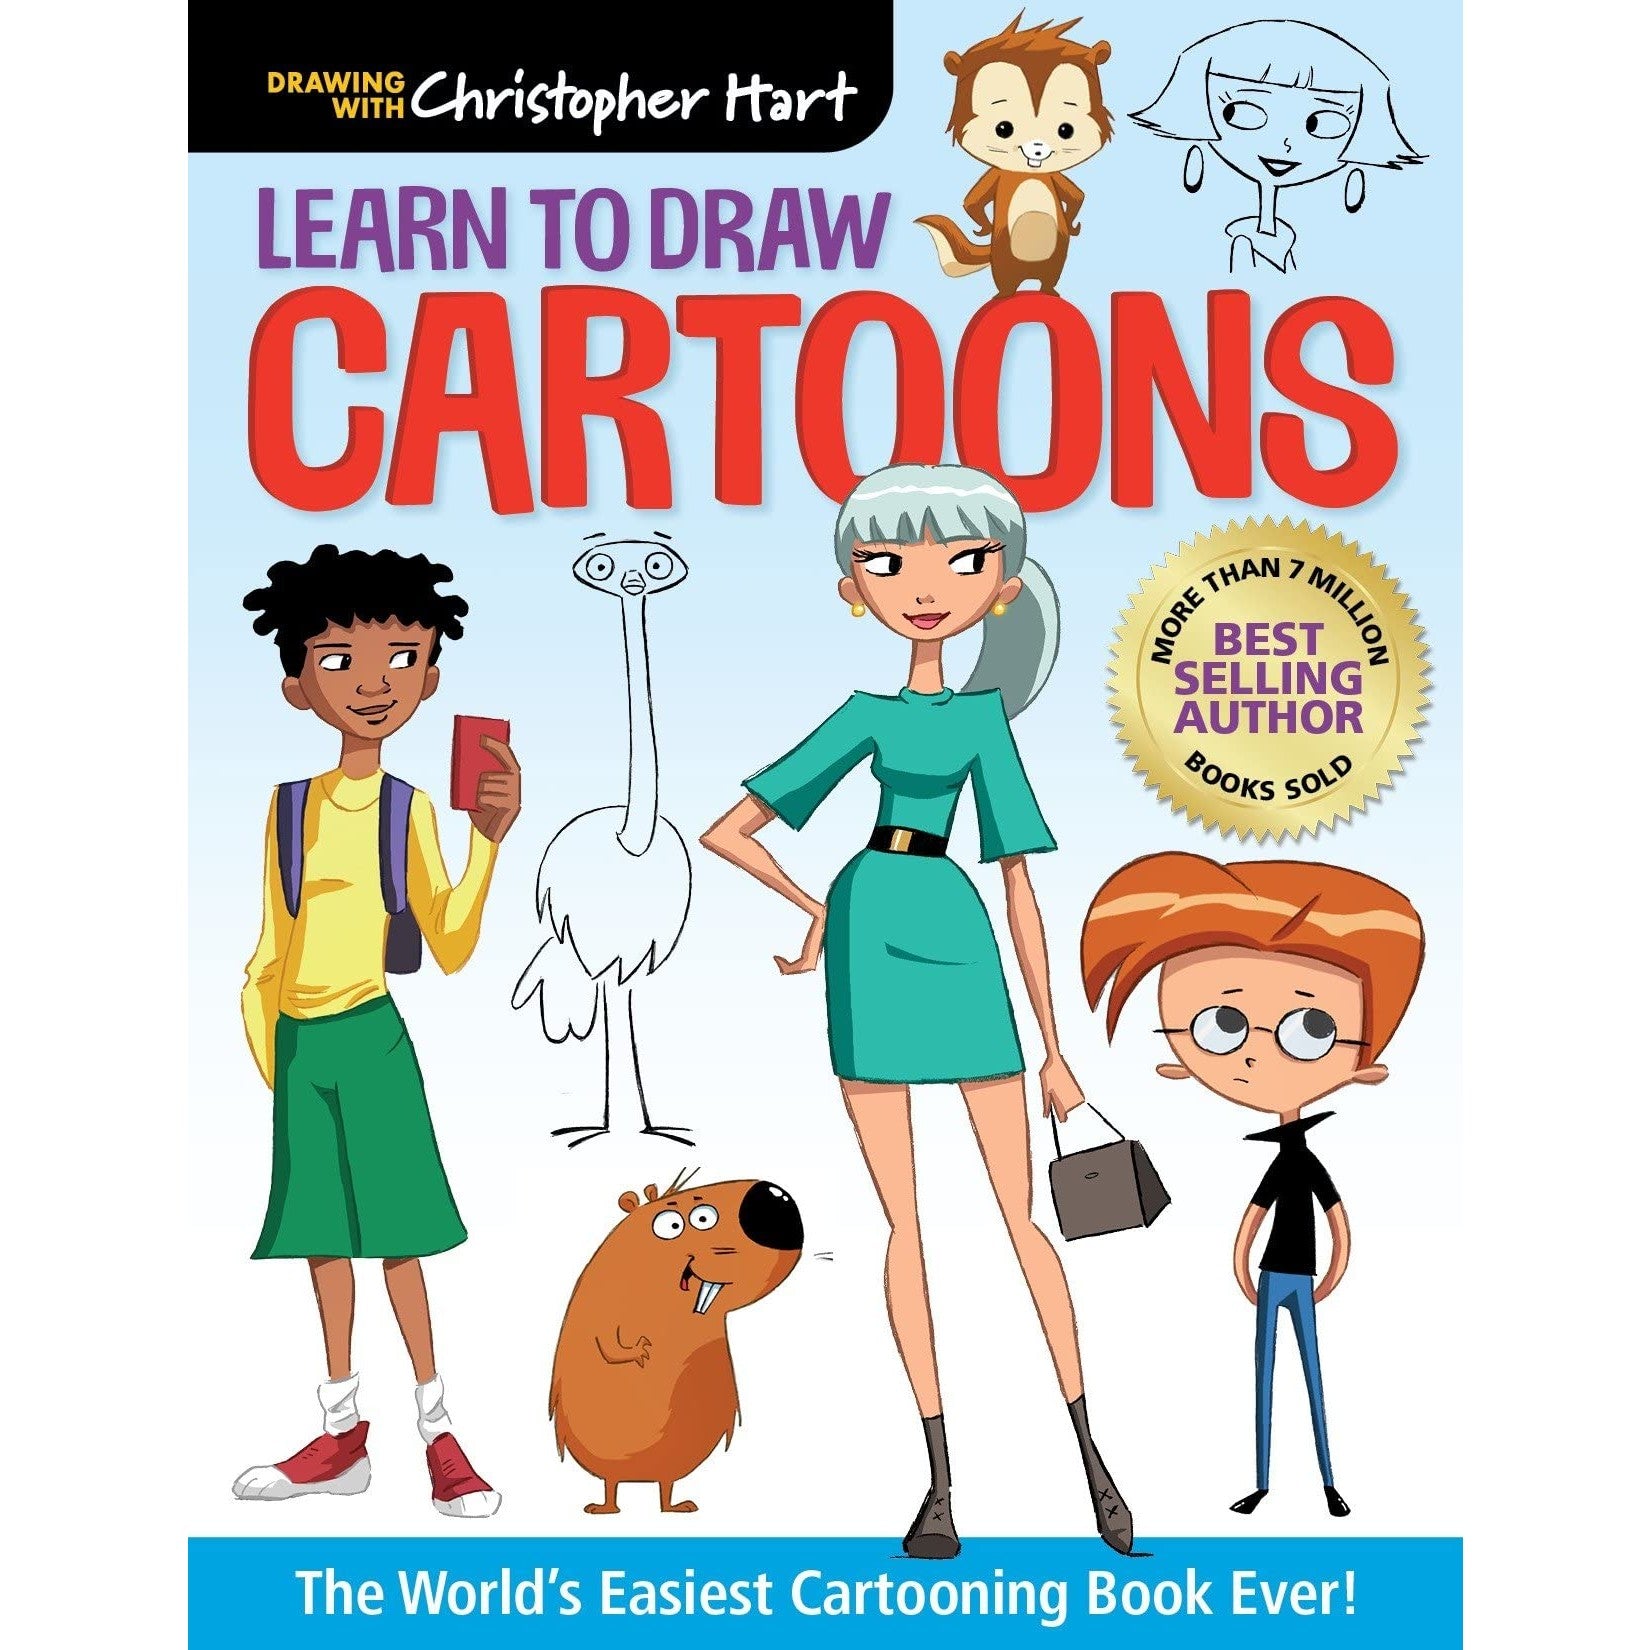 A cover of a book titled, 'Learn to Draw Cartoons' by Christopher Hart